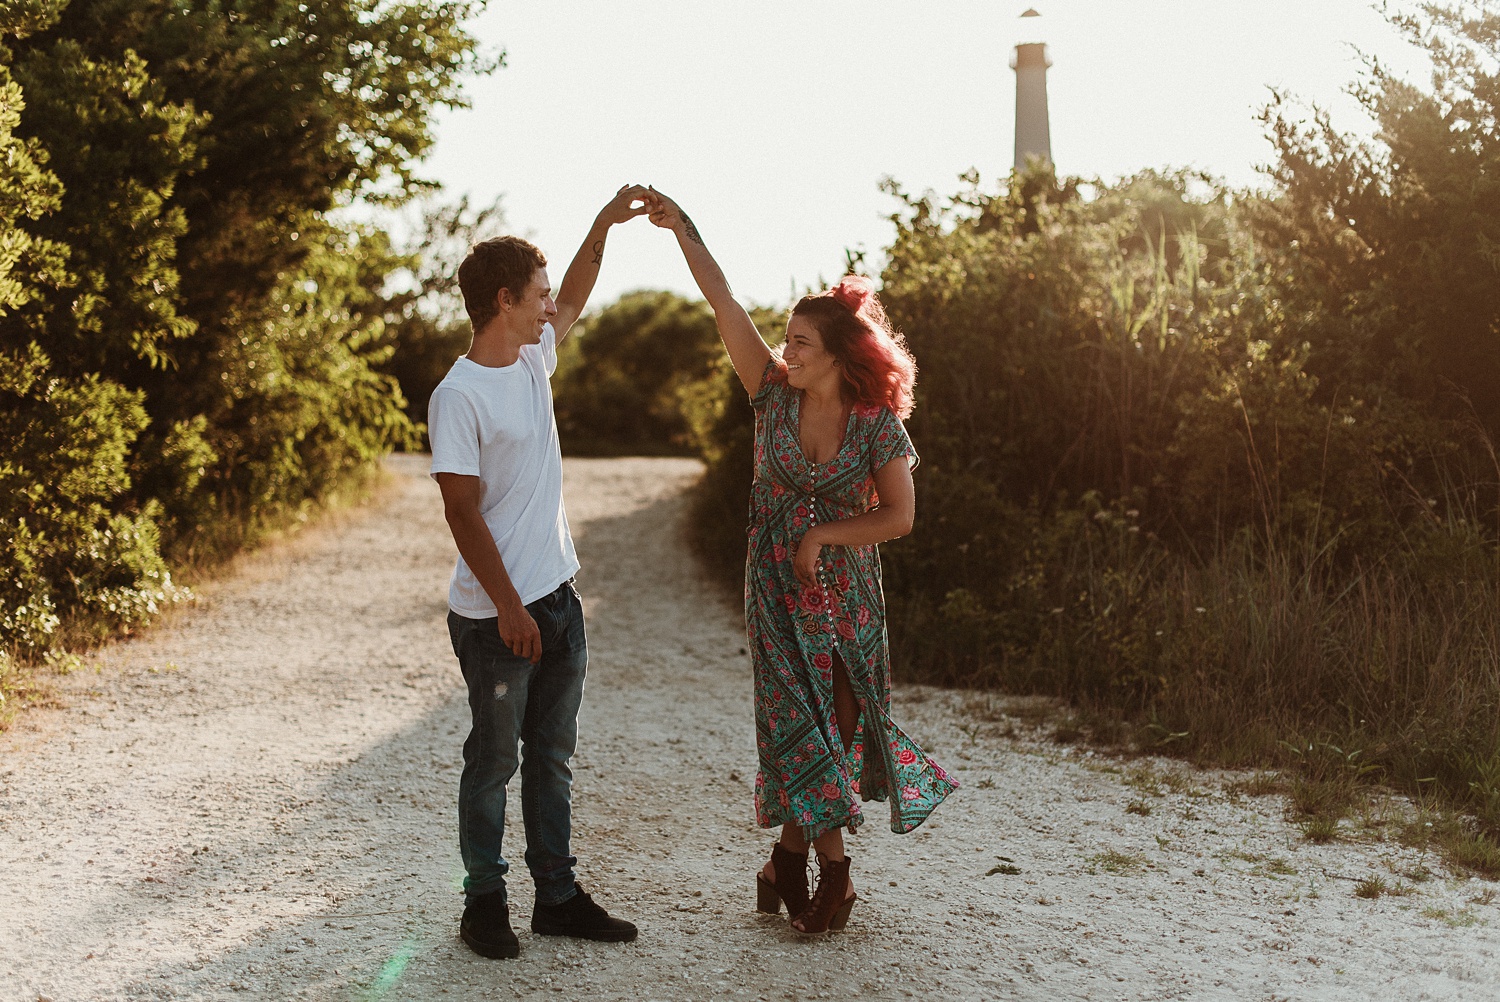 capemay-engagementsession_0010.jpg